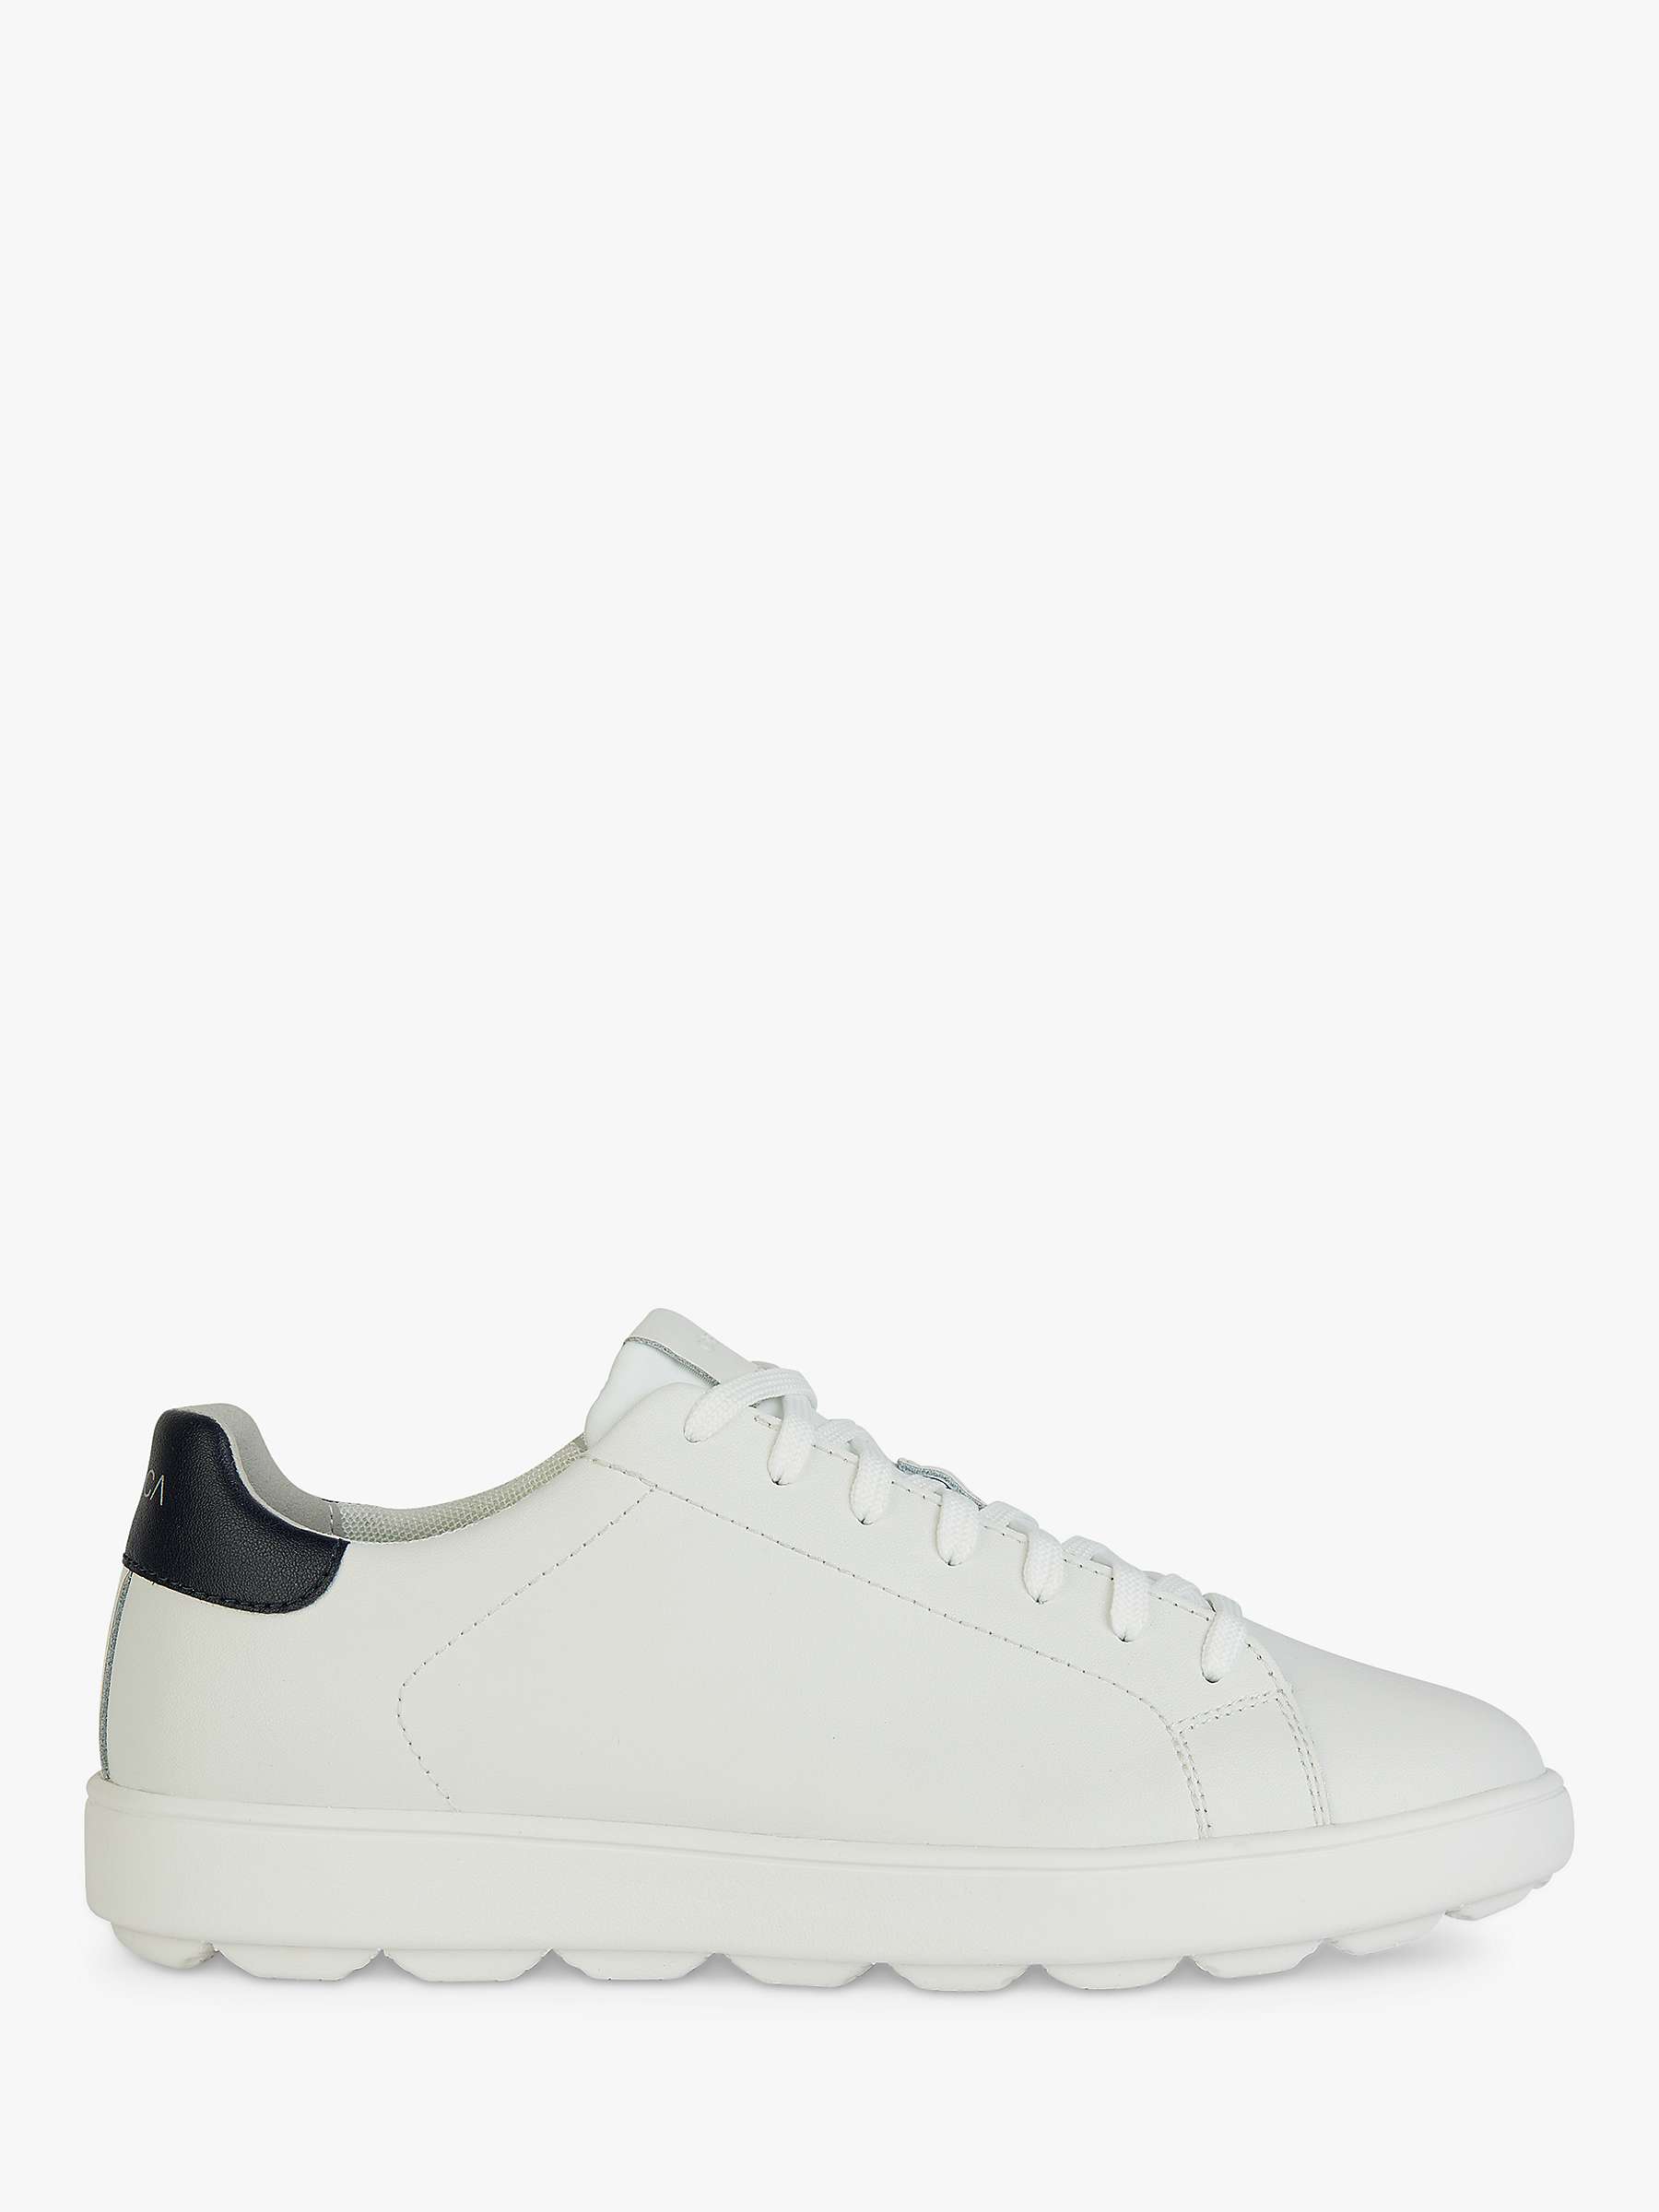 Buy Geox Spherica ECUB-1 Leather Trainers, White/Navy Online at johnlewis.com